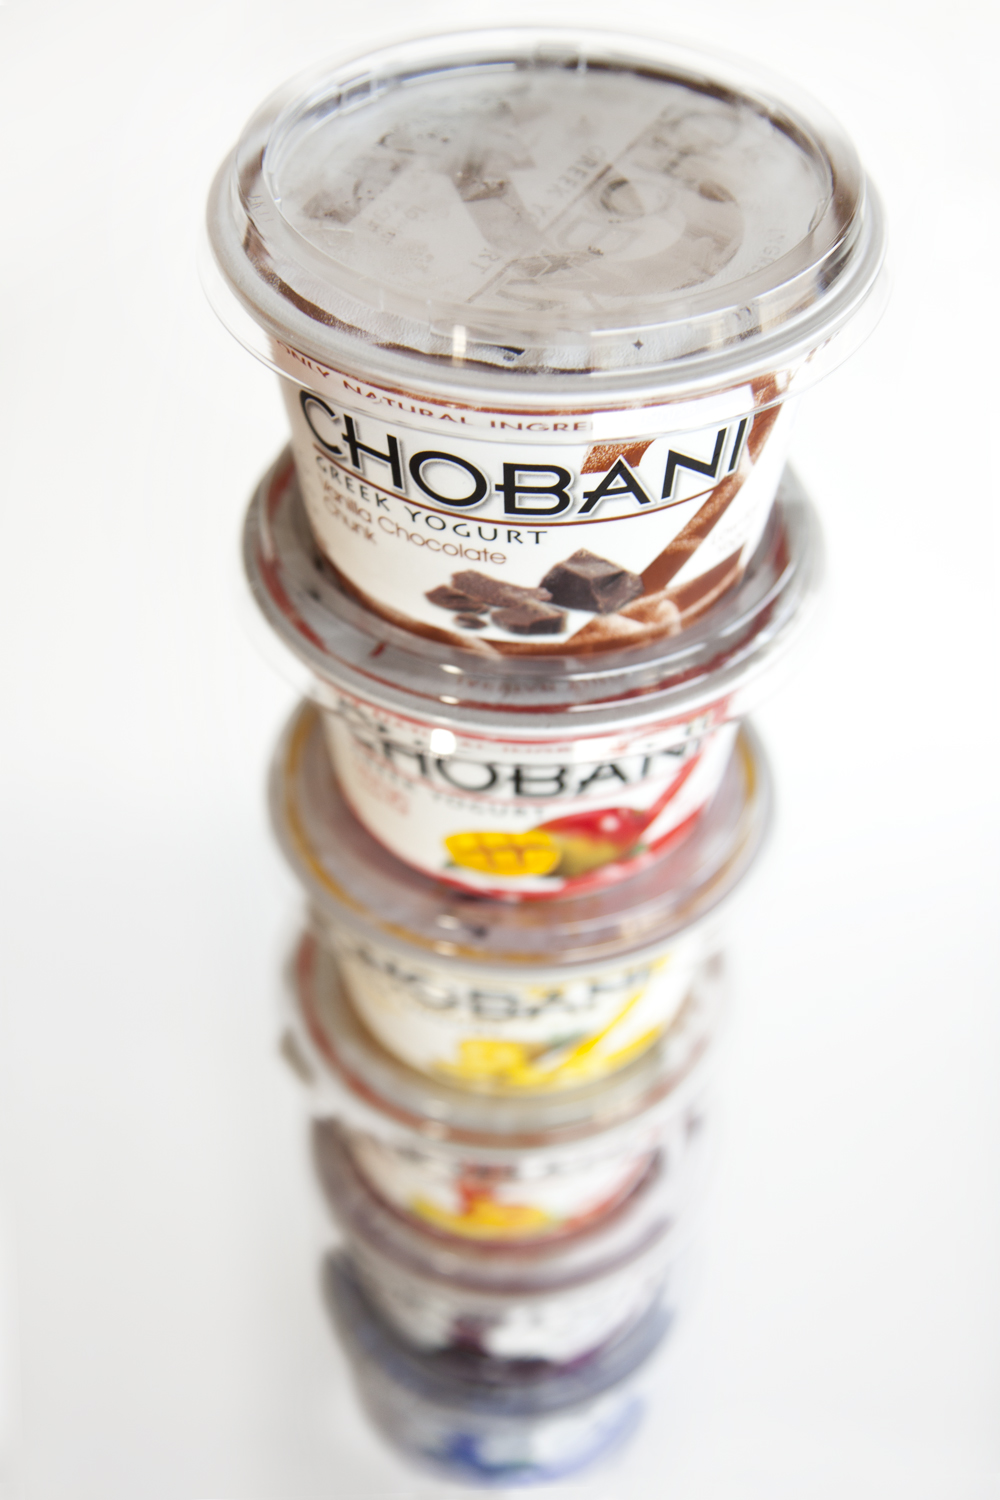 Chobani Muffin For One + Giveaway